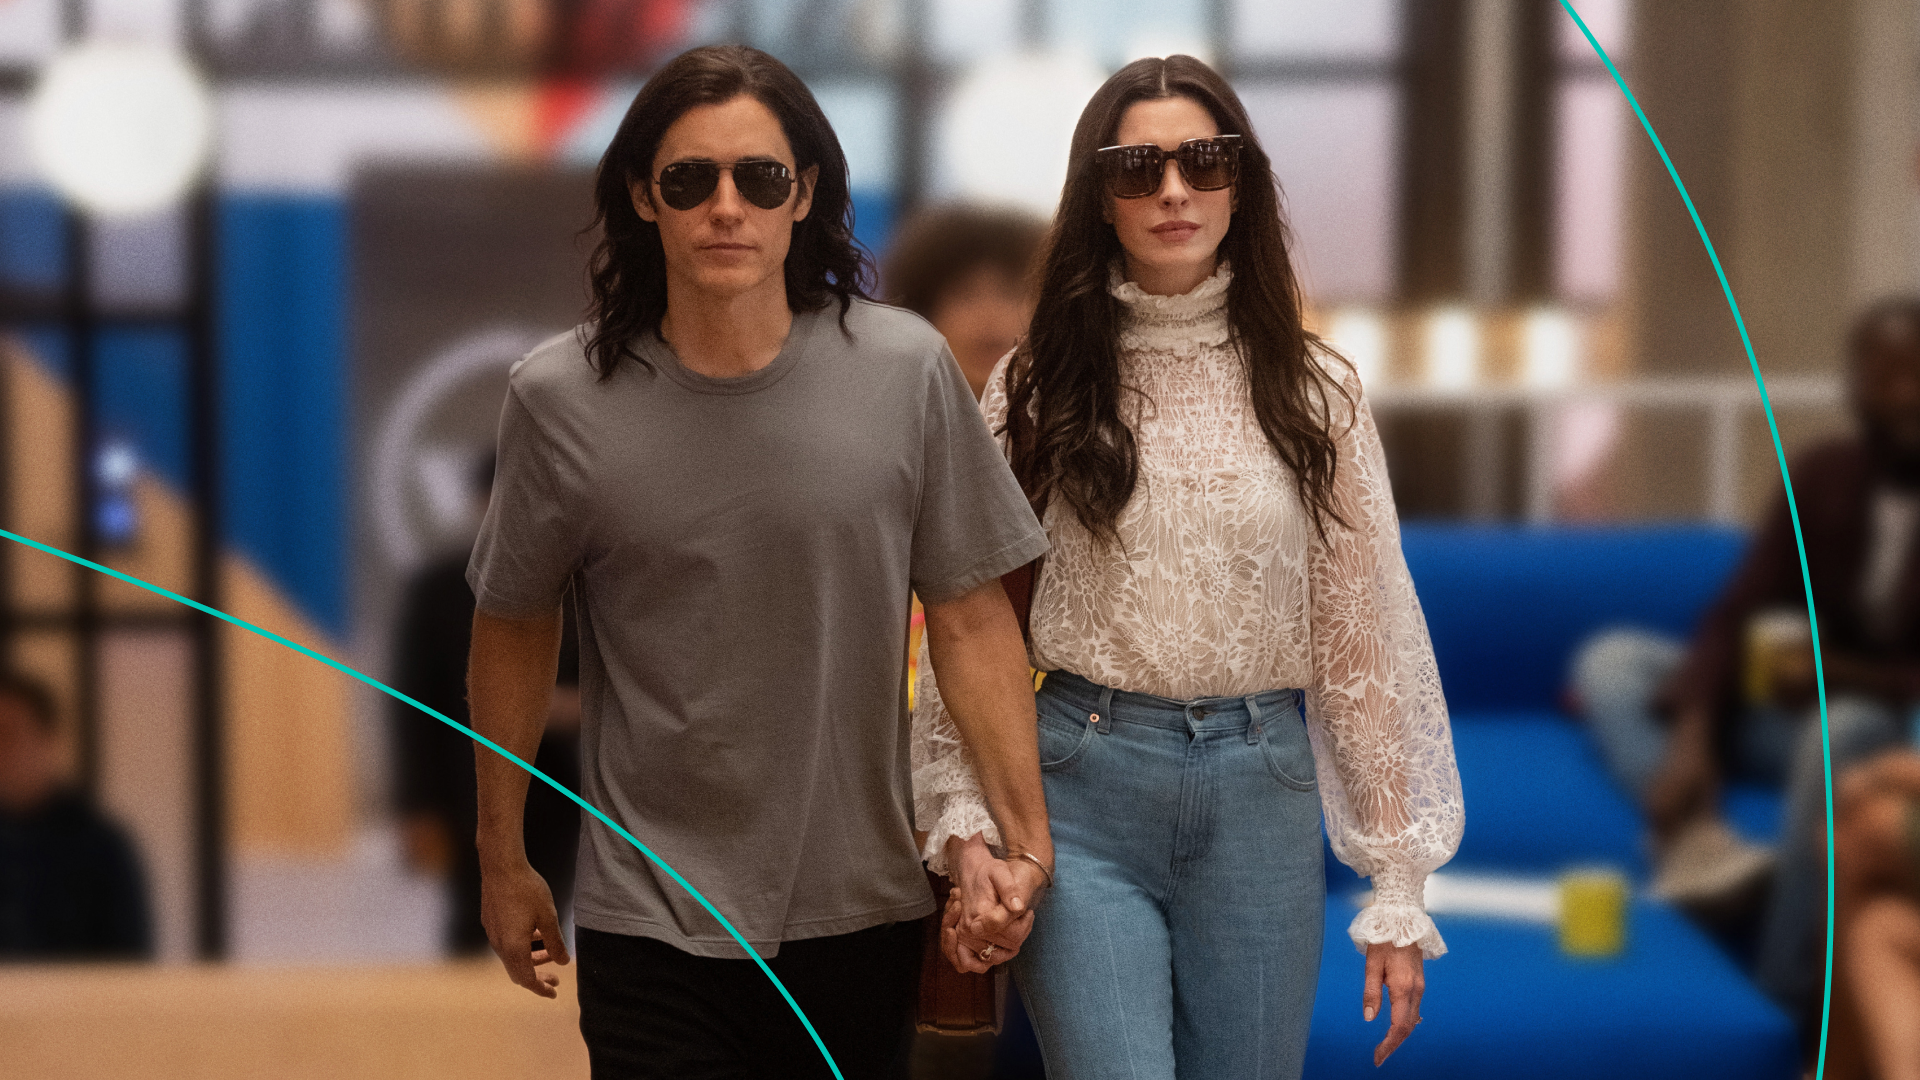 Jared Leto and Anne Hathaway walking and holding hands. 